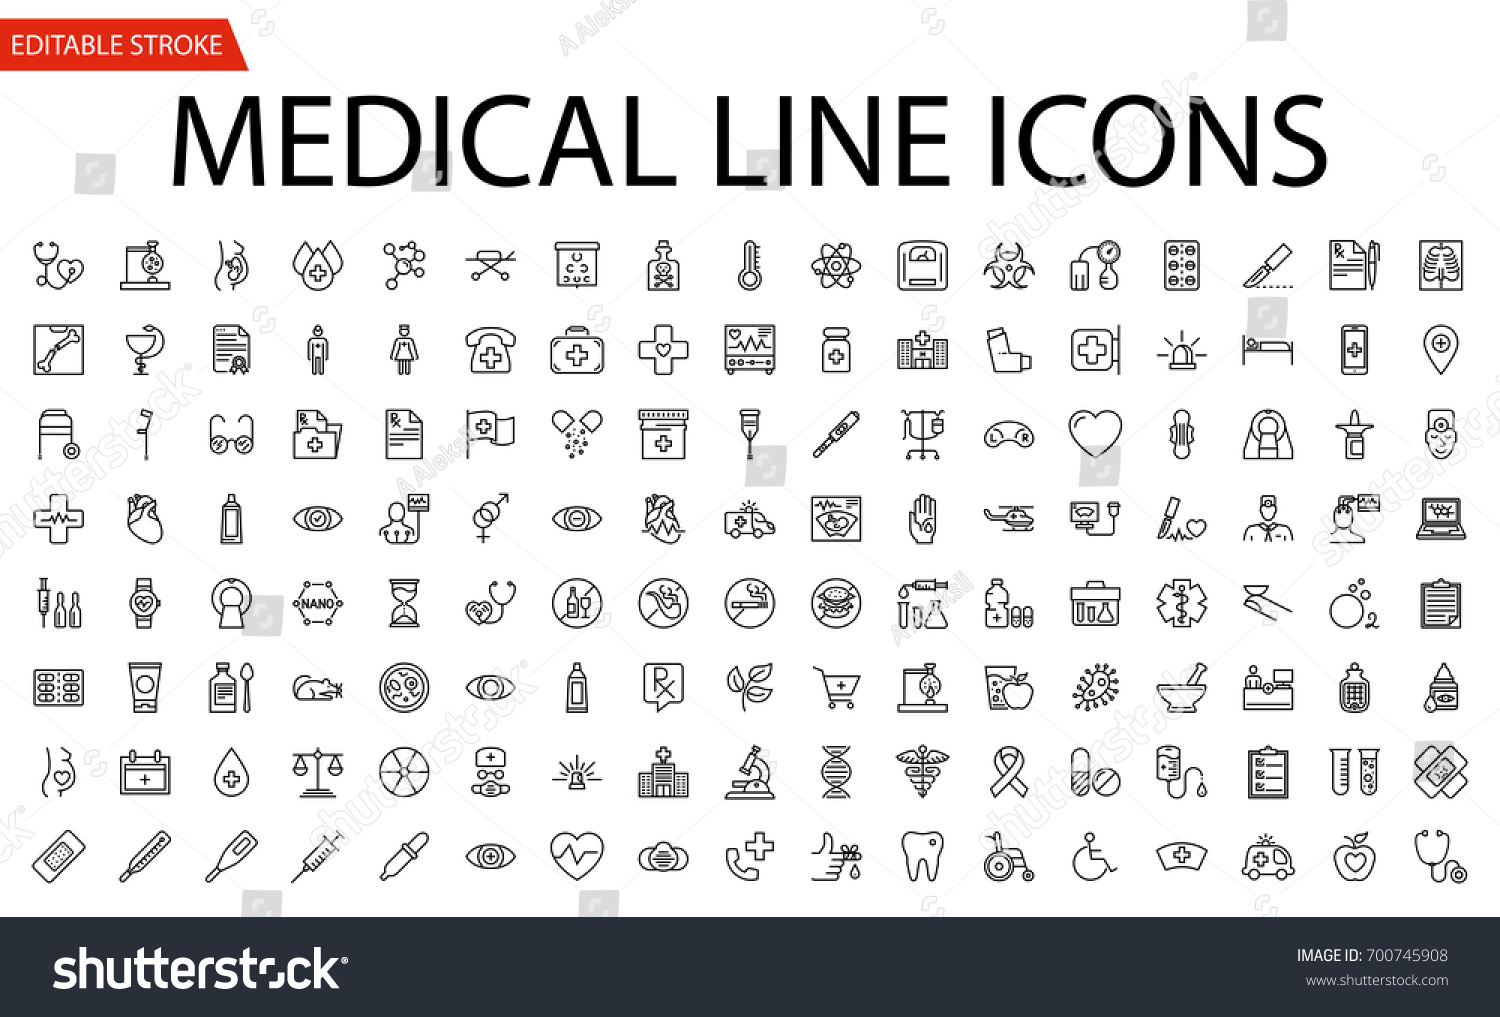 Medical Vector Icons Set. Line Icons, Sign and Symbols in Flat Linear Design Medicine and Health Care with Elements for Mobile Concepts and Web Apps. Collection Modern Infographic Logo and Pictogram. #700745908